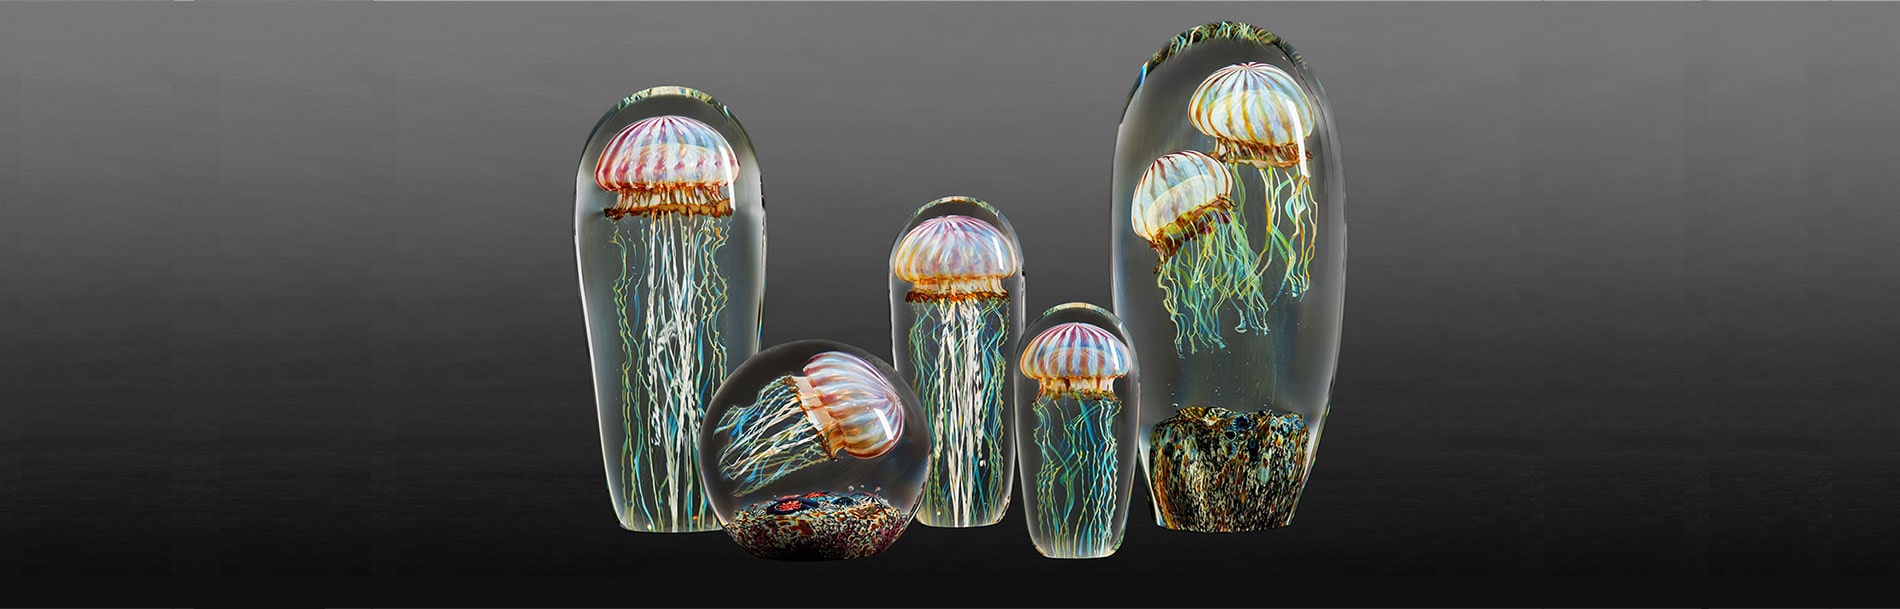 Jellyfish collections